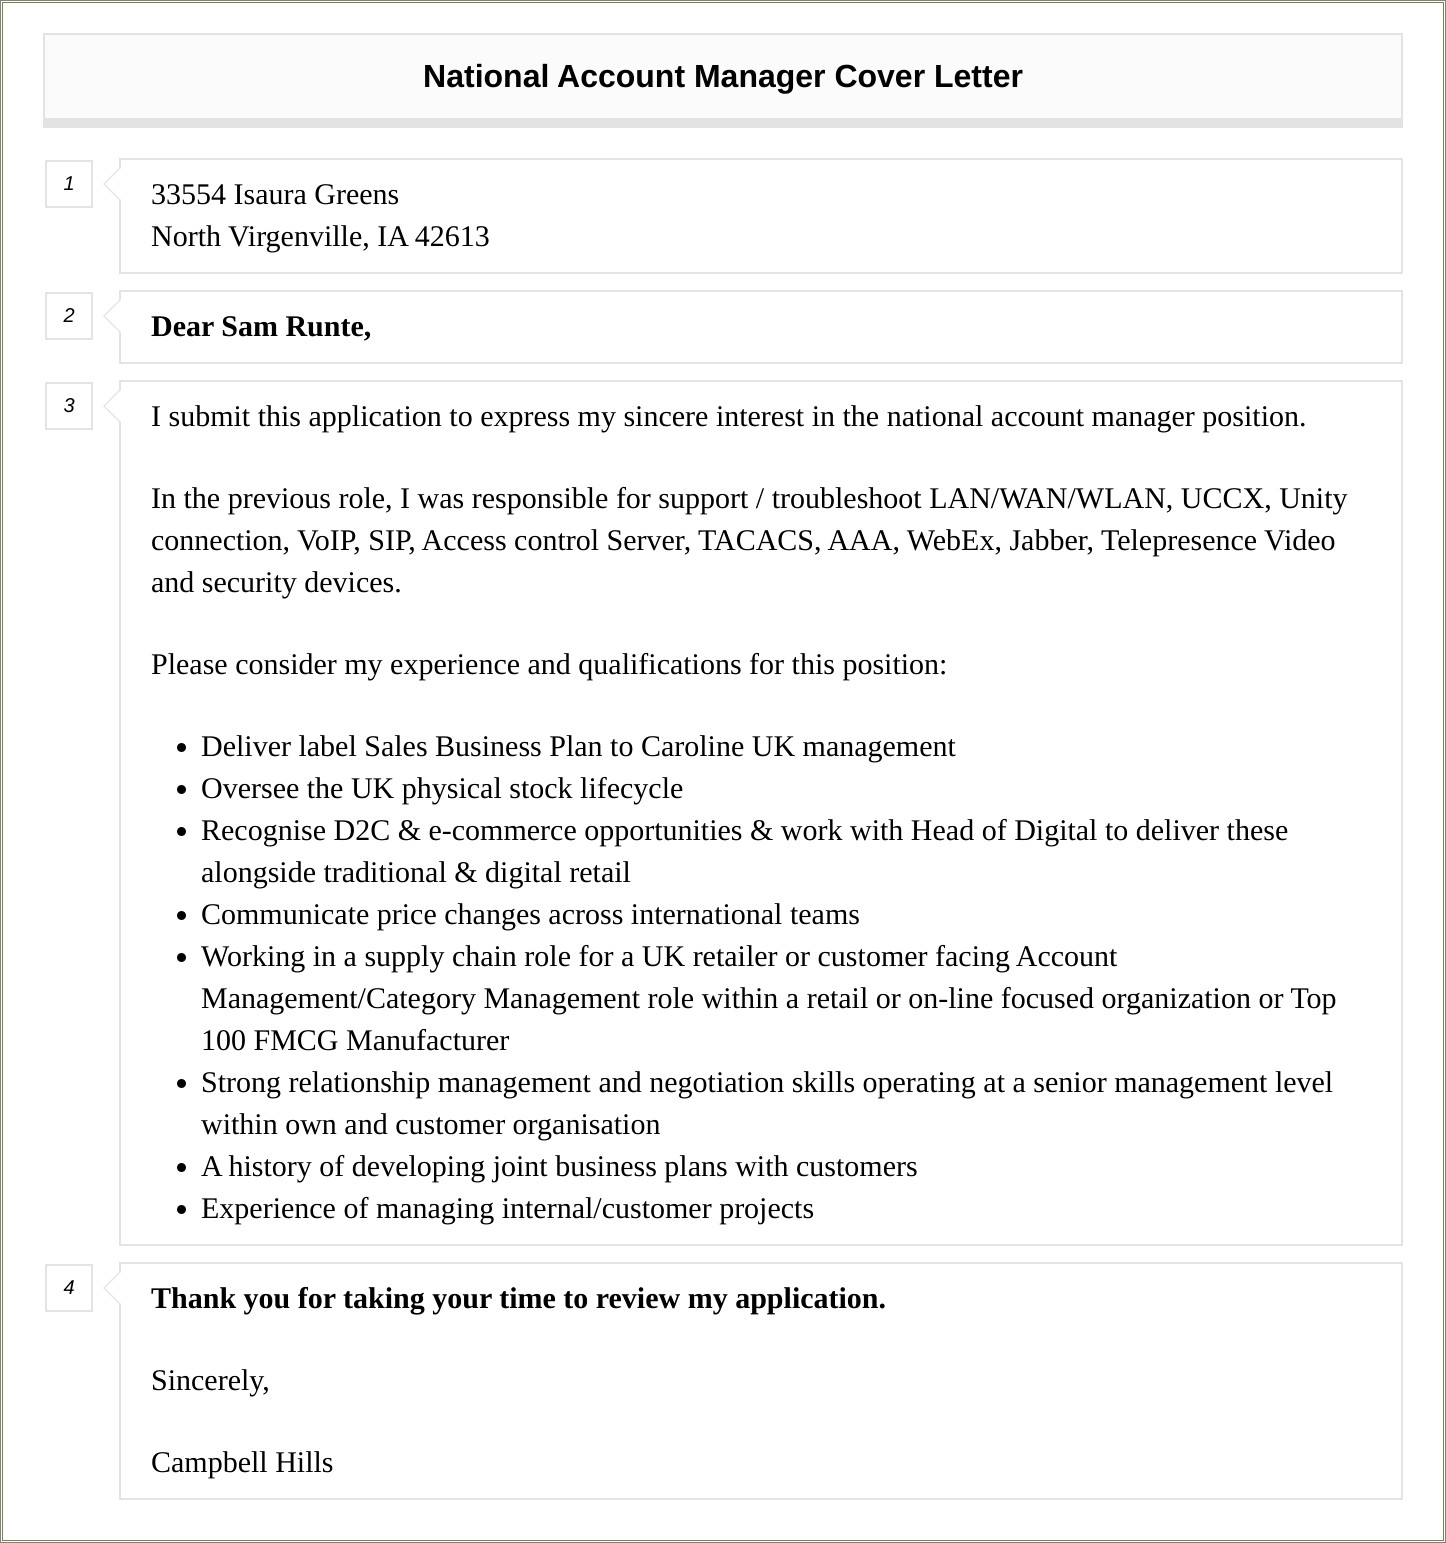 National Account Manager Resume Cover Letter